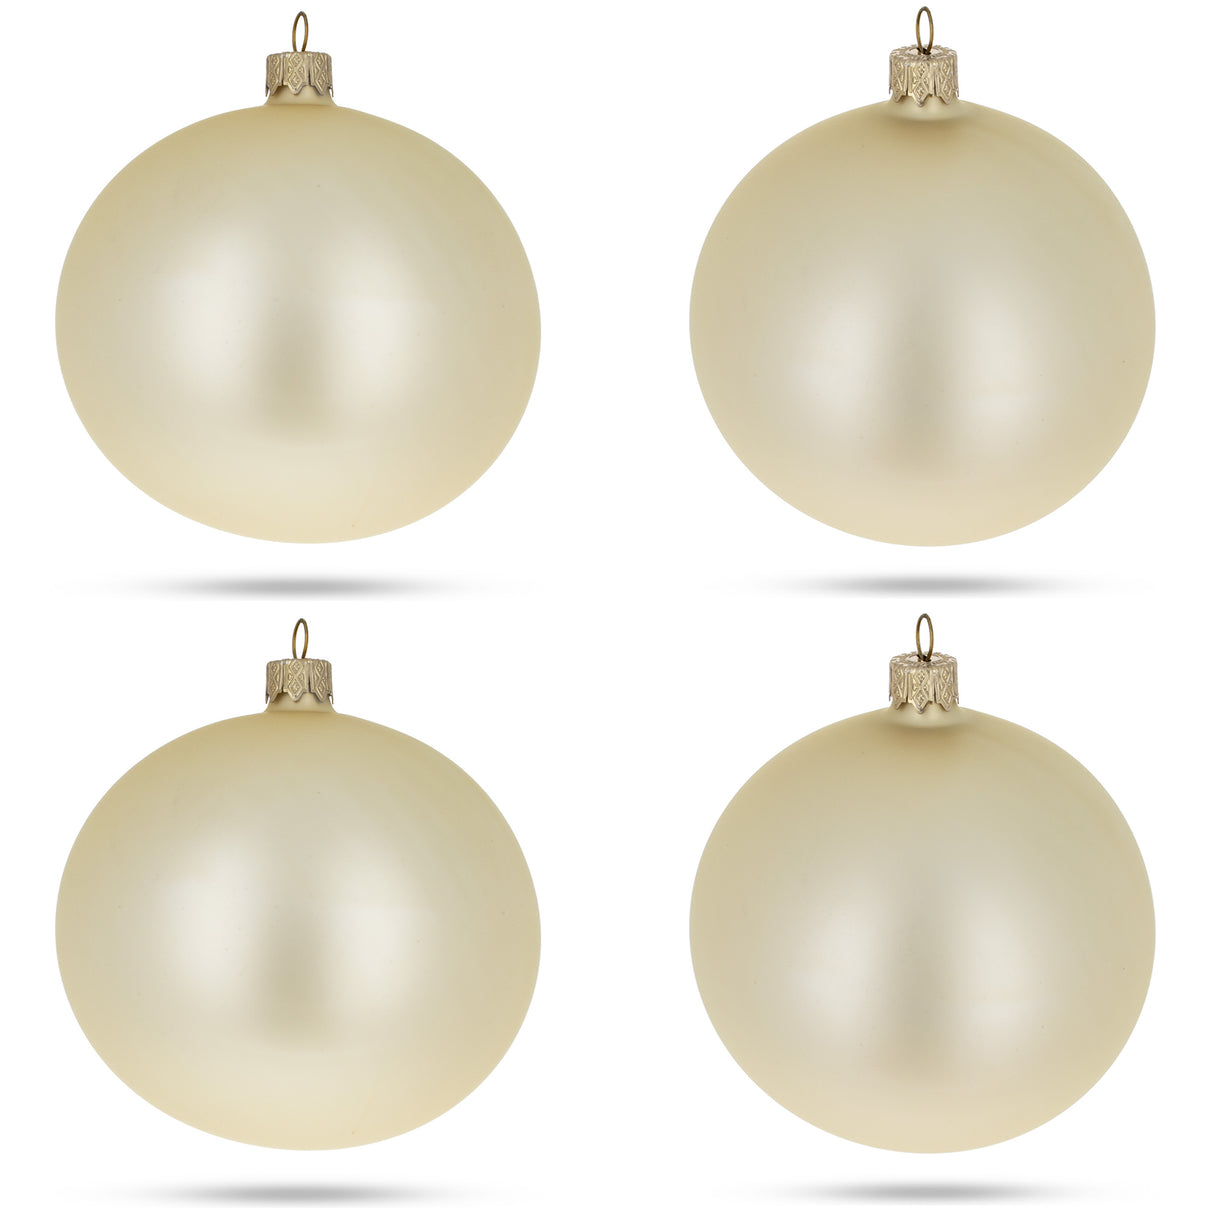 Set of 4 Champagne Solid Color Glass Ball Christmas Ornaments 4 Inches in Beige color, Round shape